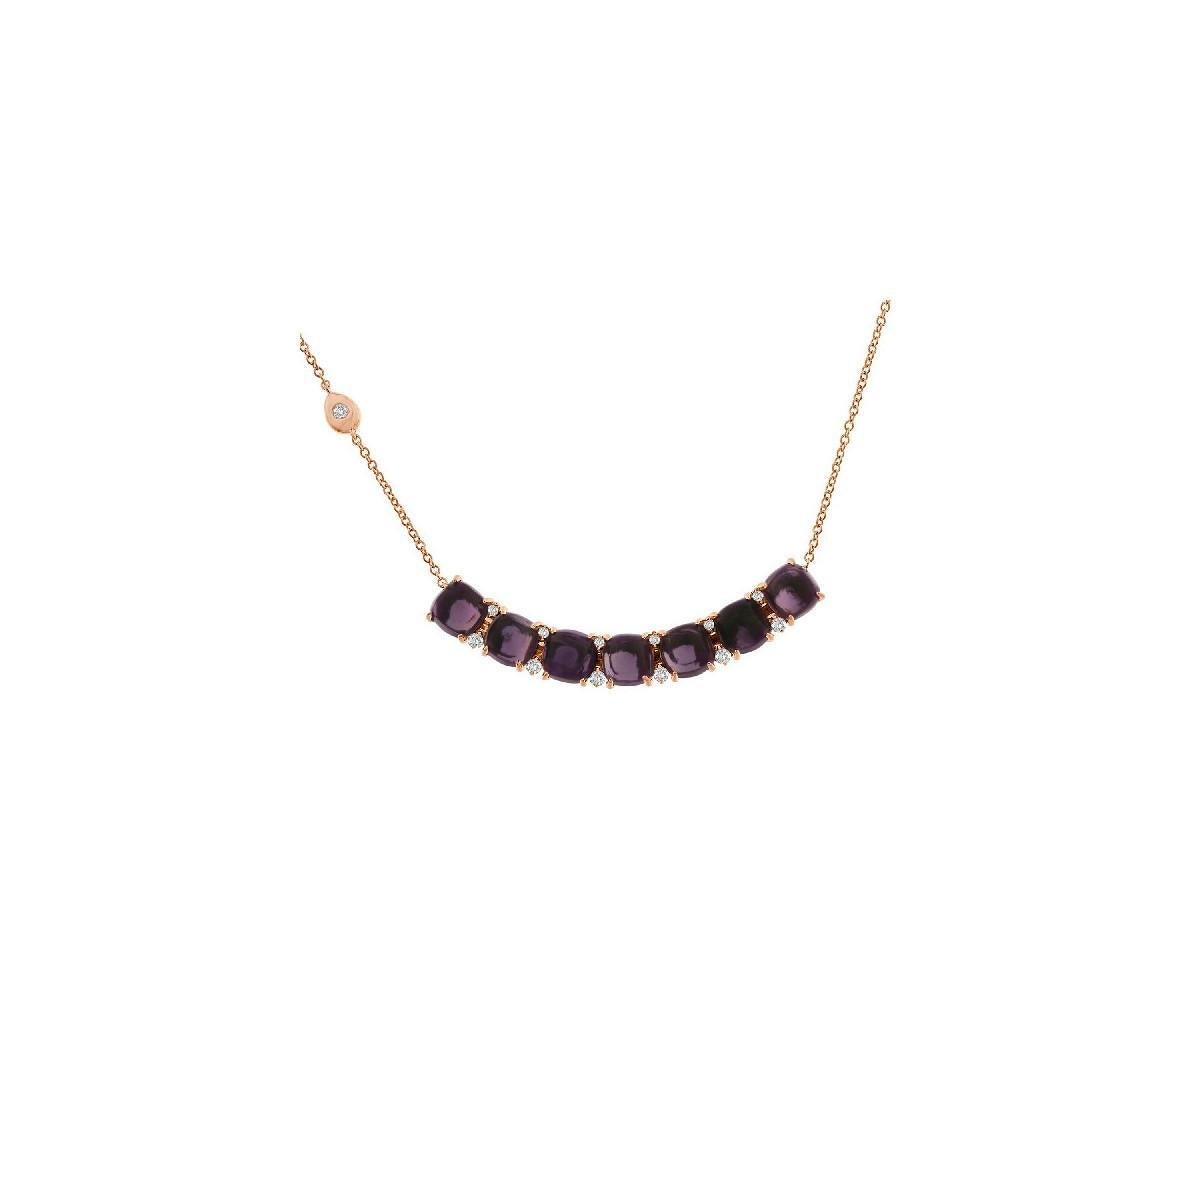 Necklace in 18K Rose Gold, Diamonds and Amethysts

Rose Gold 18K
14 Diamonds 0.15ct.
7 amethysts 4.60ct.
Weight 5.82gr.

ALSO AVAILABLE
Rose Gold 18Kt
14 Diamonds 0.14ct.
7 Amethysts 5.04ct.
Weight 4.77gr.
€1900/ $1950 approx.

ALSO AVAILABLE
Rose